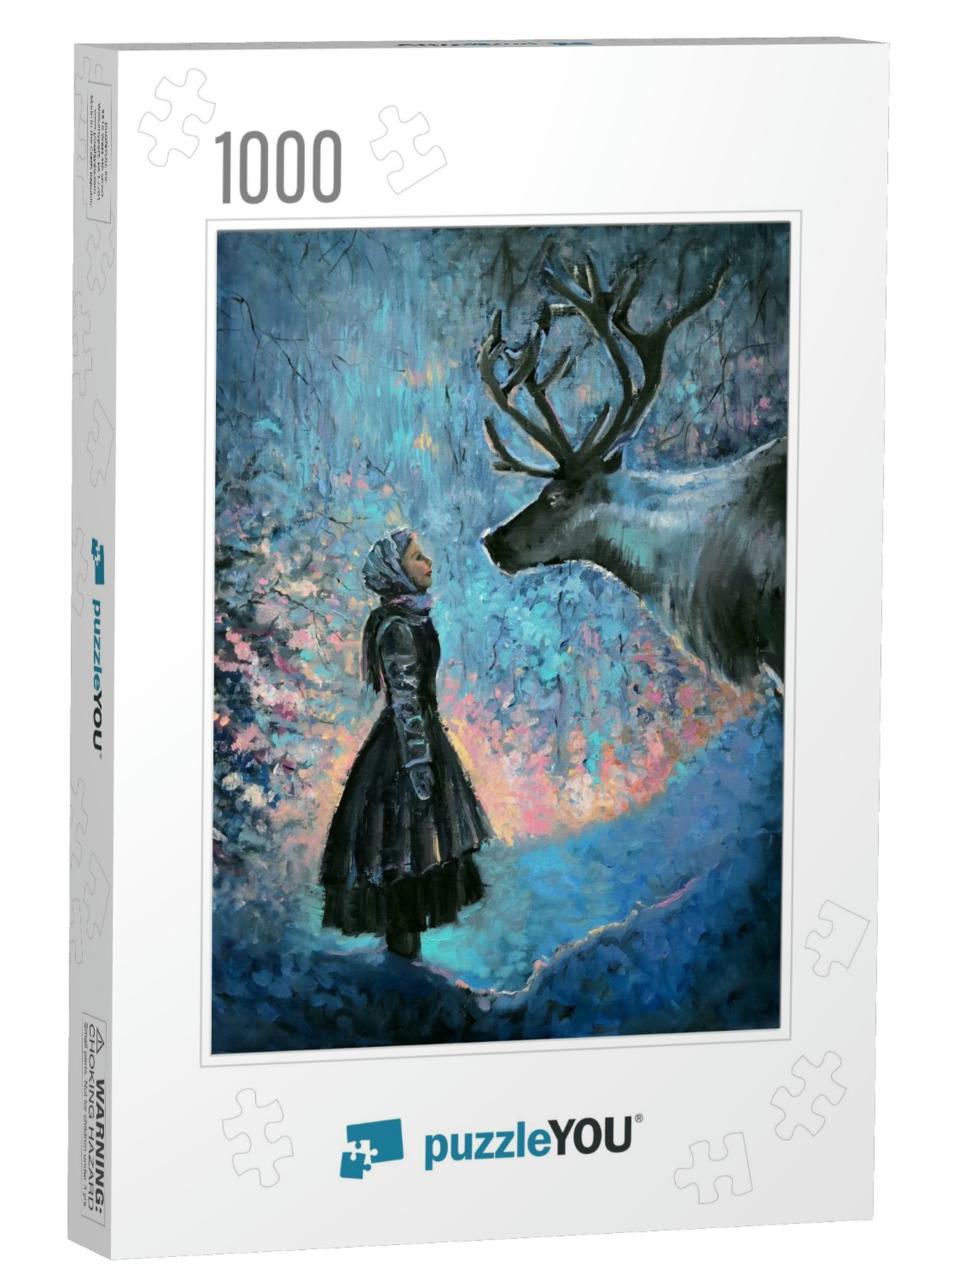 Oil Painting Fabulous Scene Girl Looks Into the Eyes of a... Jigsaw Puzzle with 1000 pieces